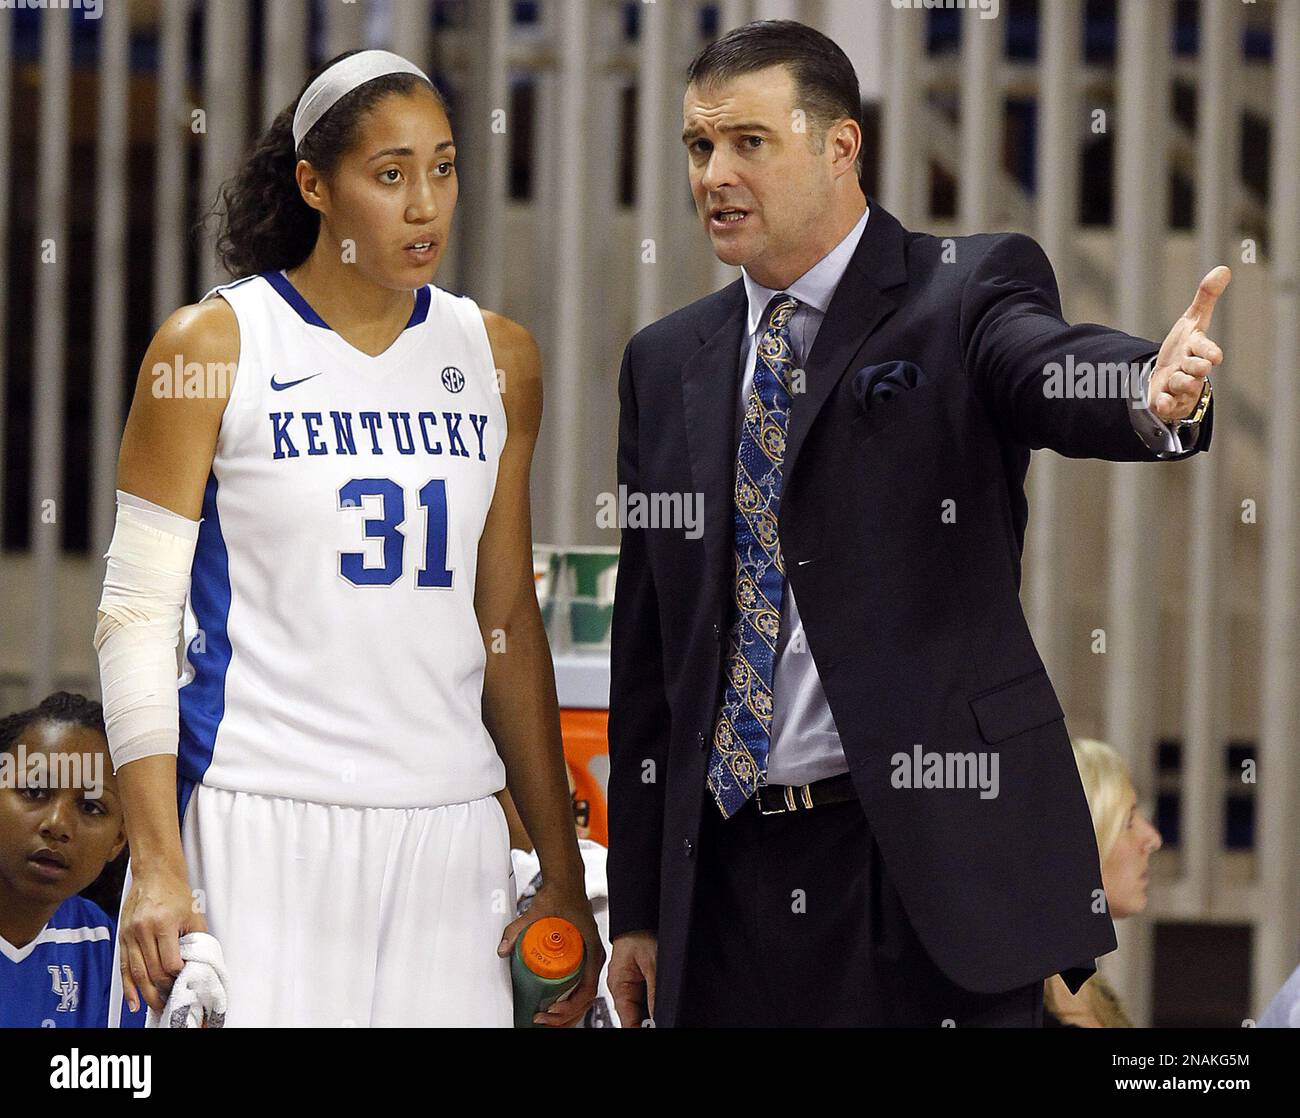 Kentucky head coach Matthew Mitchell, right, instructs Samantha Drake (31)  during the first half of an NCAA college basketball game against Samford in  Lexington, Ky., Wednesday, Dec. 21, 2011. (AP Photo/James Crisp